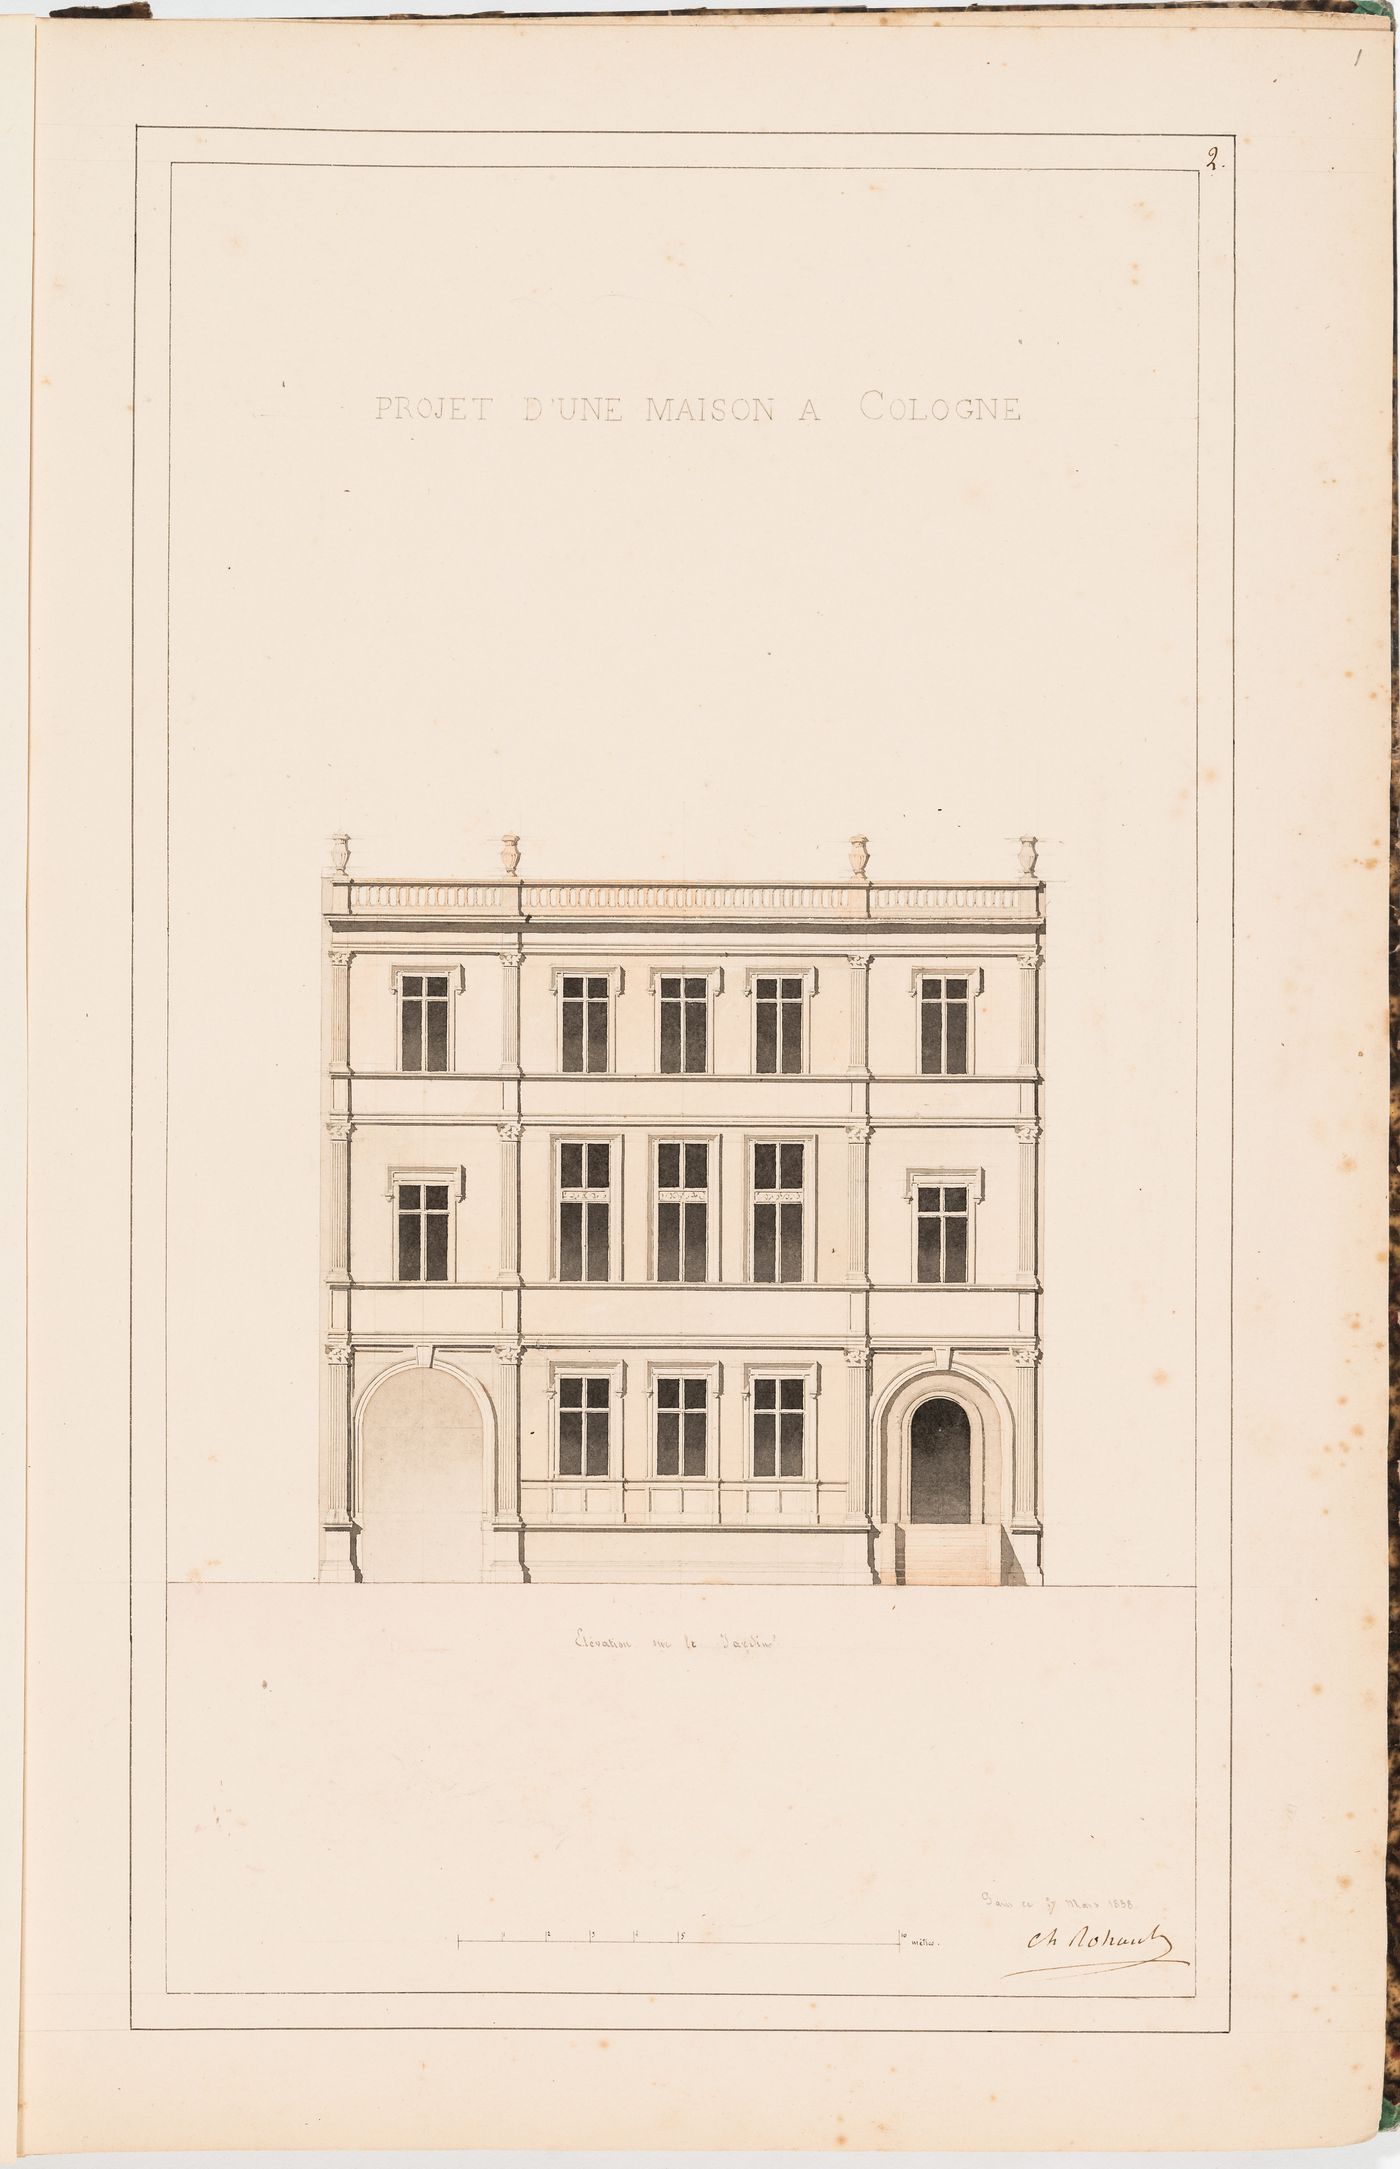 Elevation for the garden façade for a three-storey house, Cologne